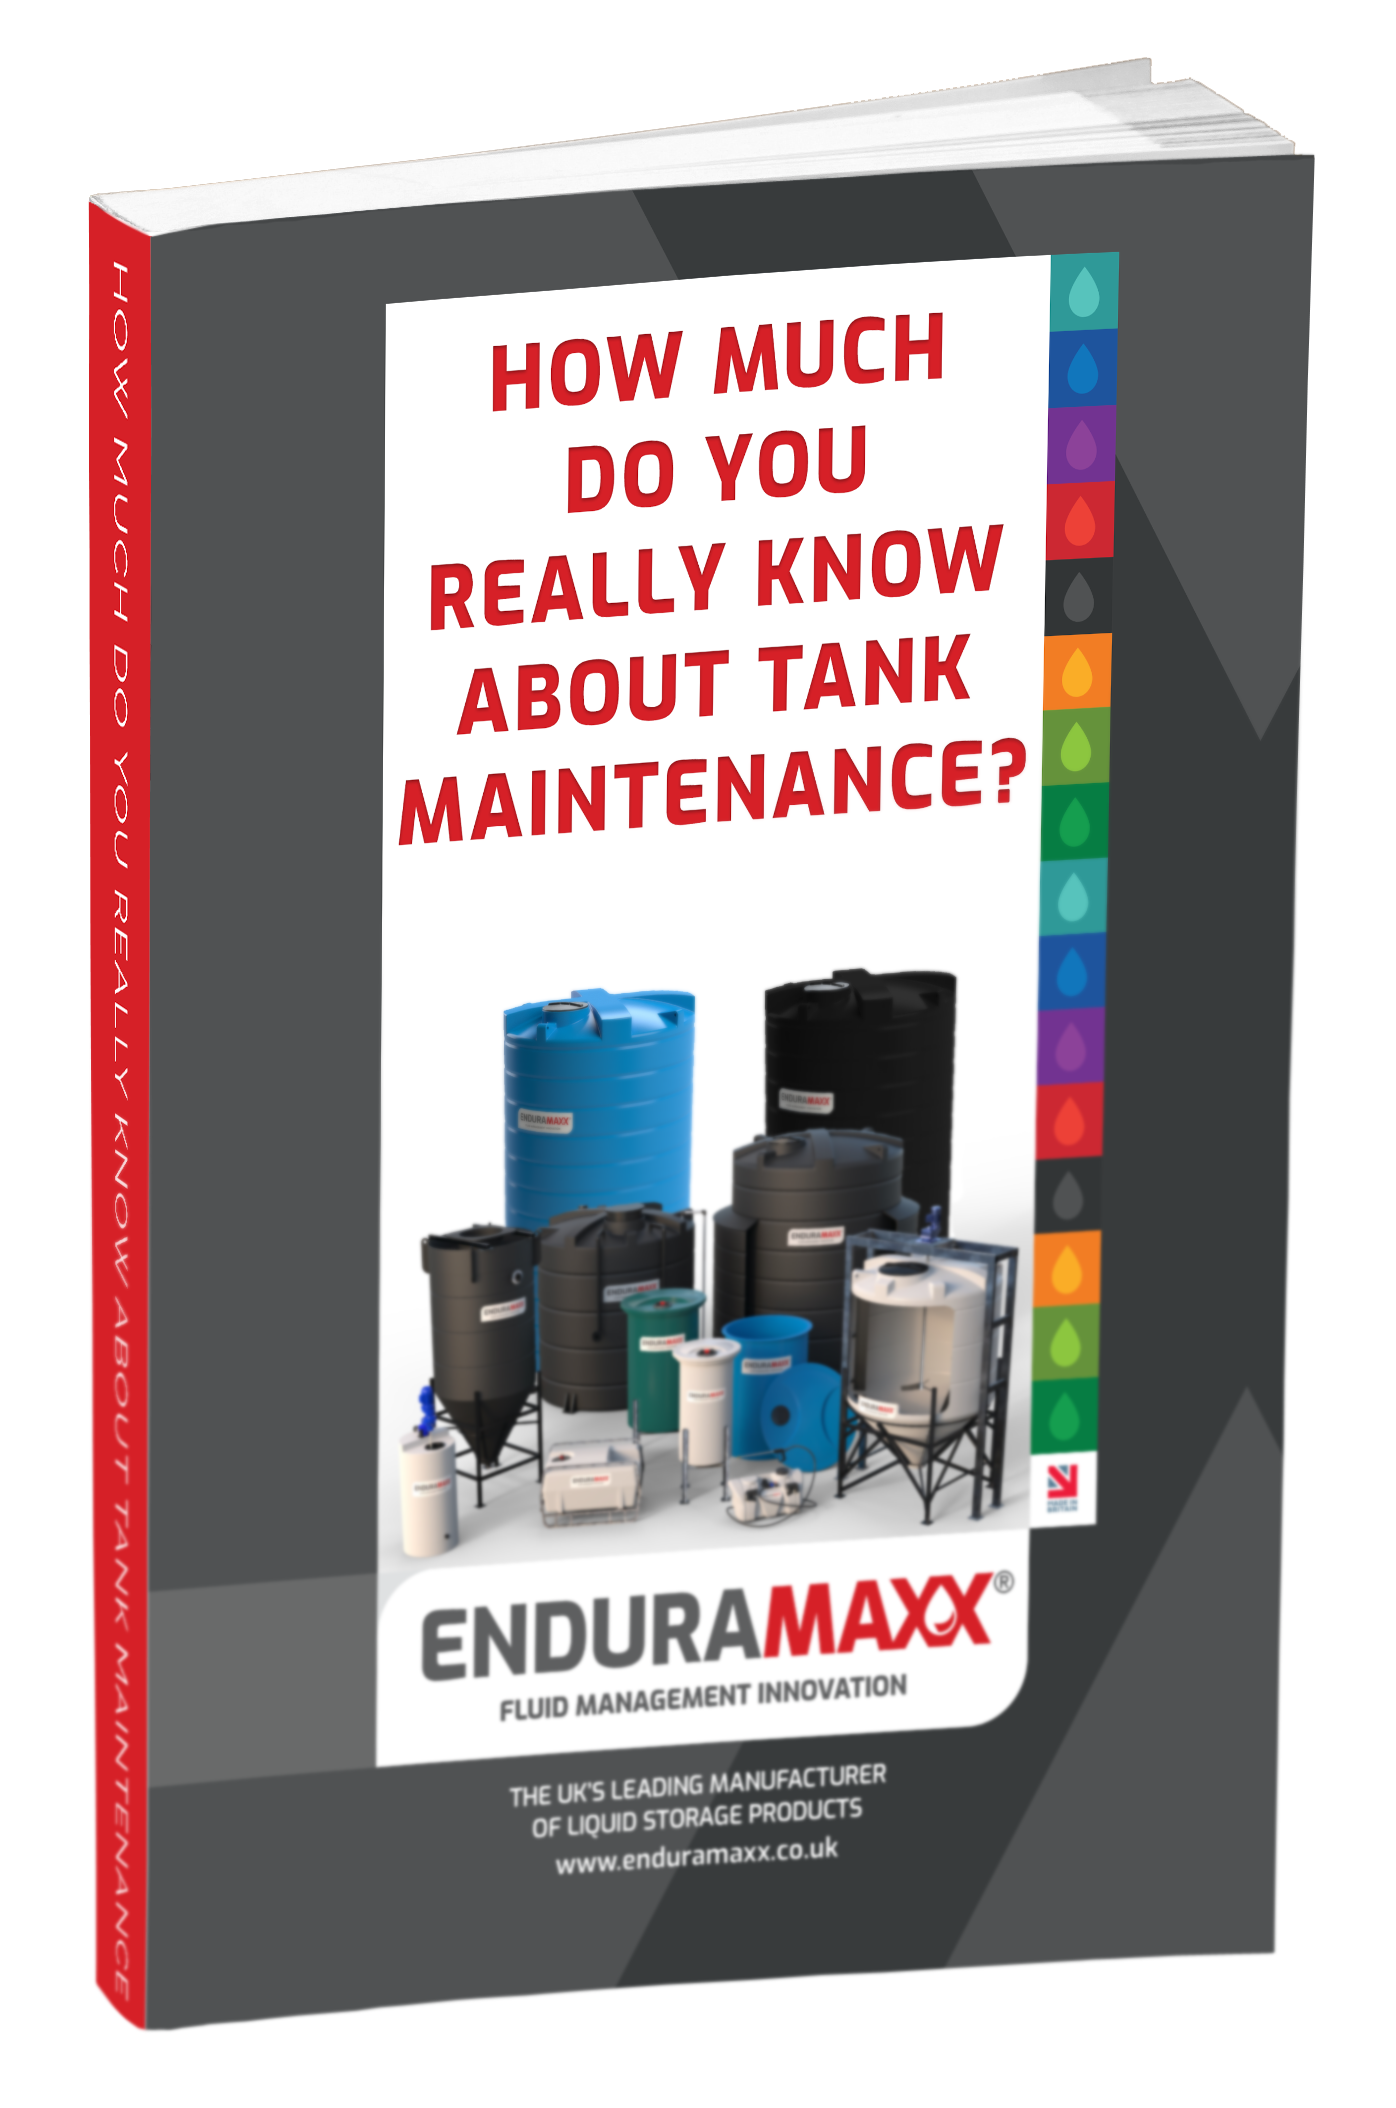 Enduramaxx-How-Much-Do-You-Really-Know-About-Tank-Maintenance-Guide-MockUp